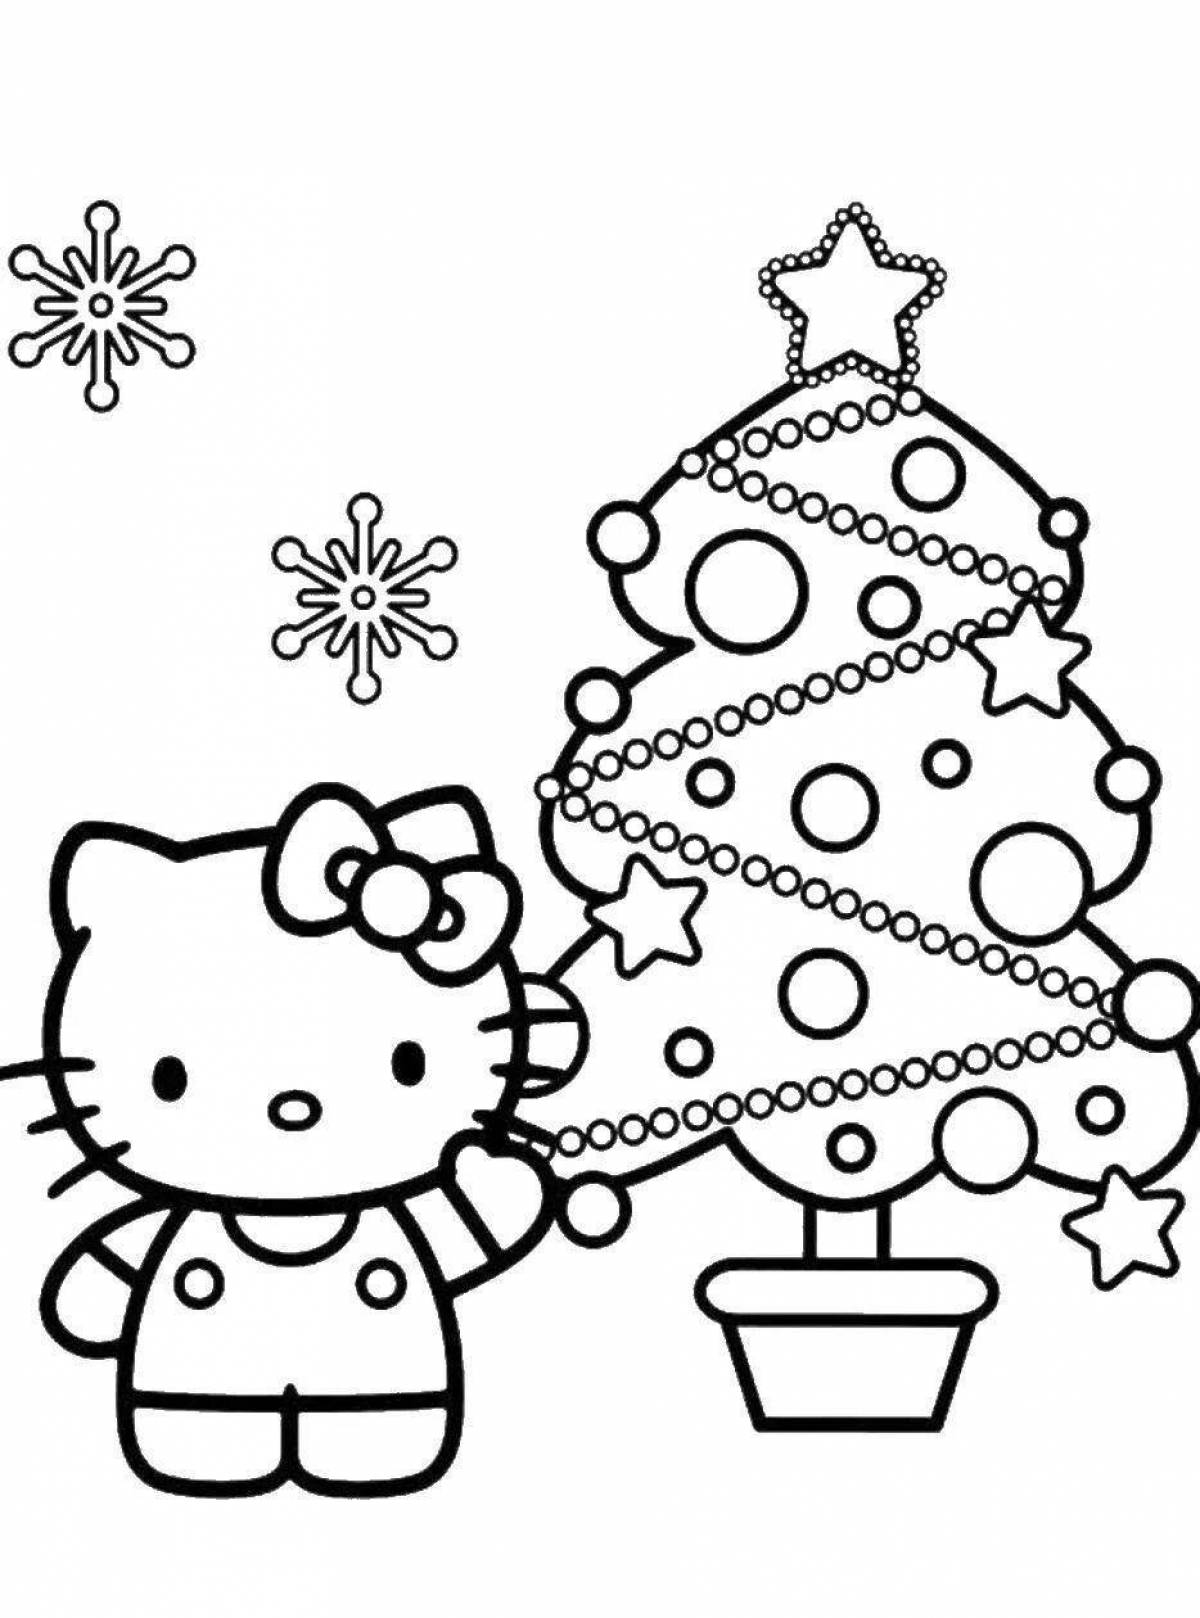 Glorious Christmas coloring book for girls